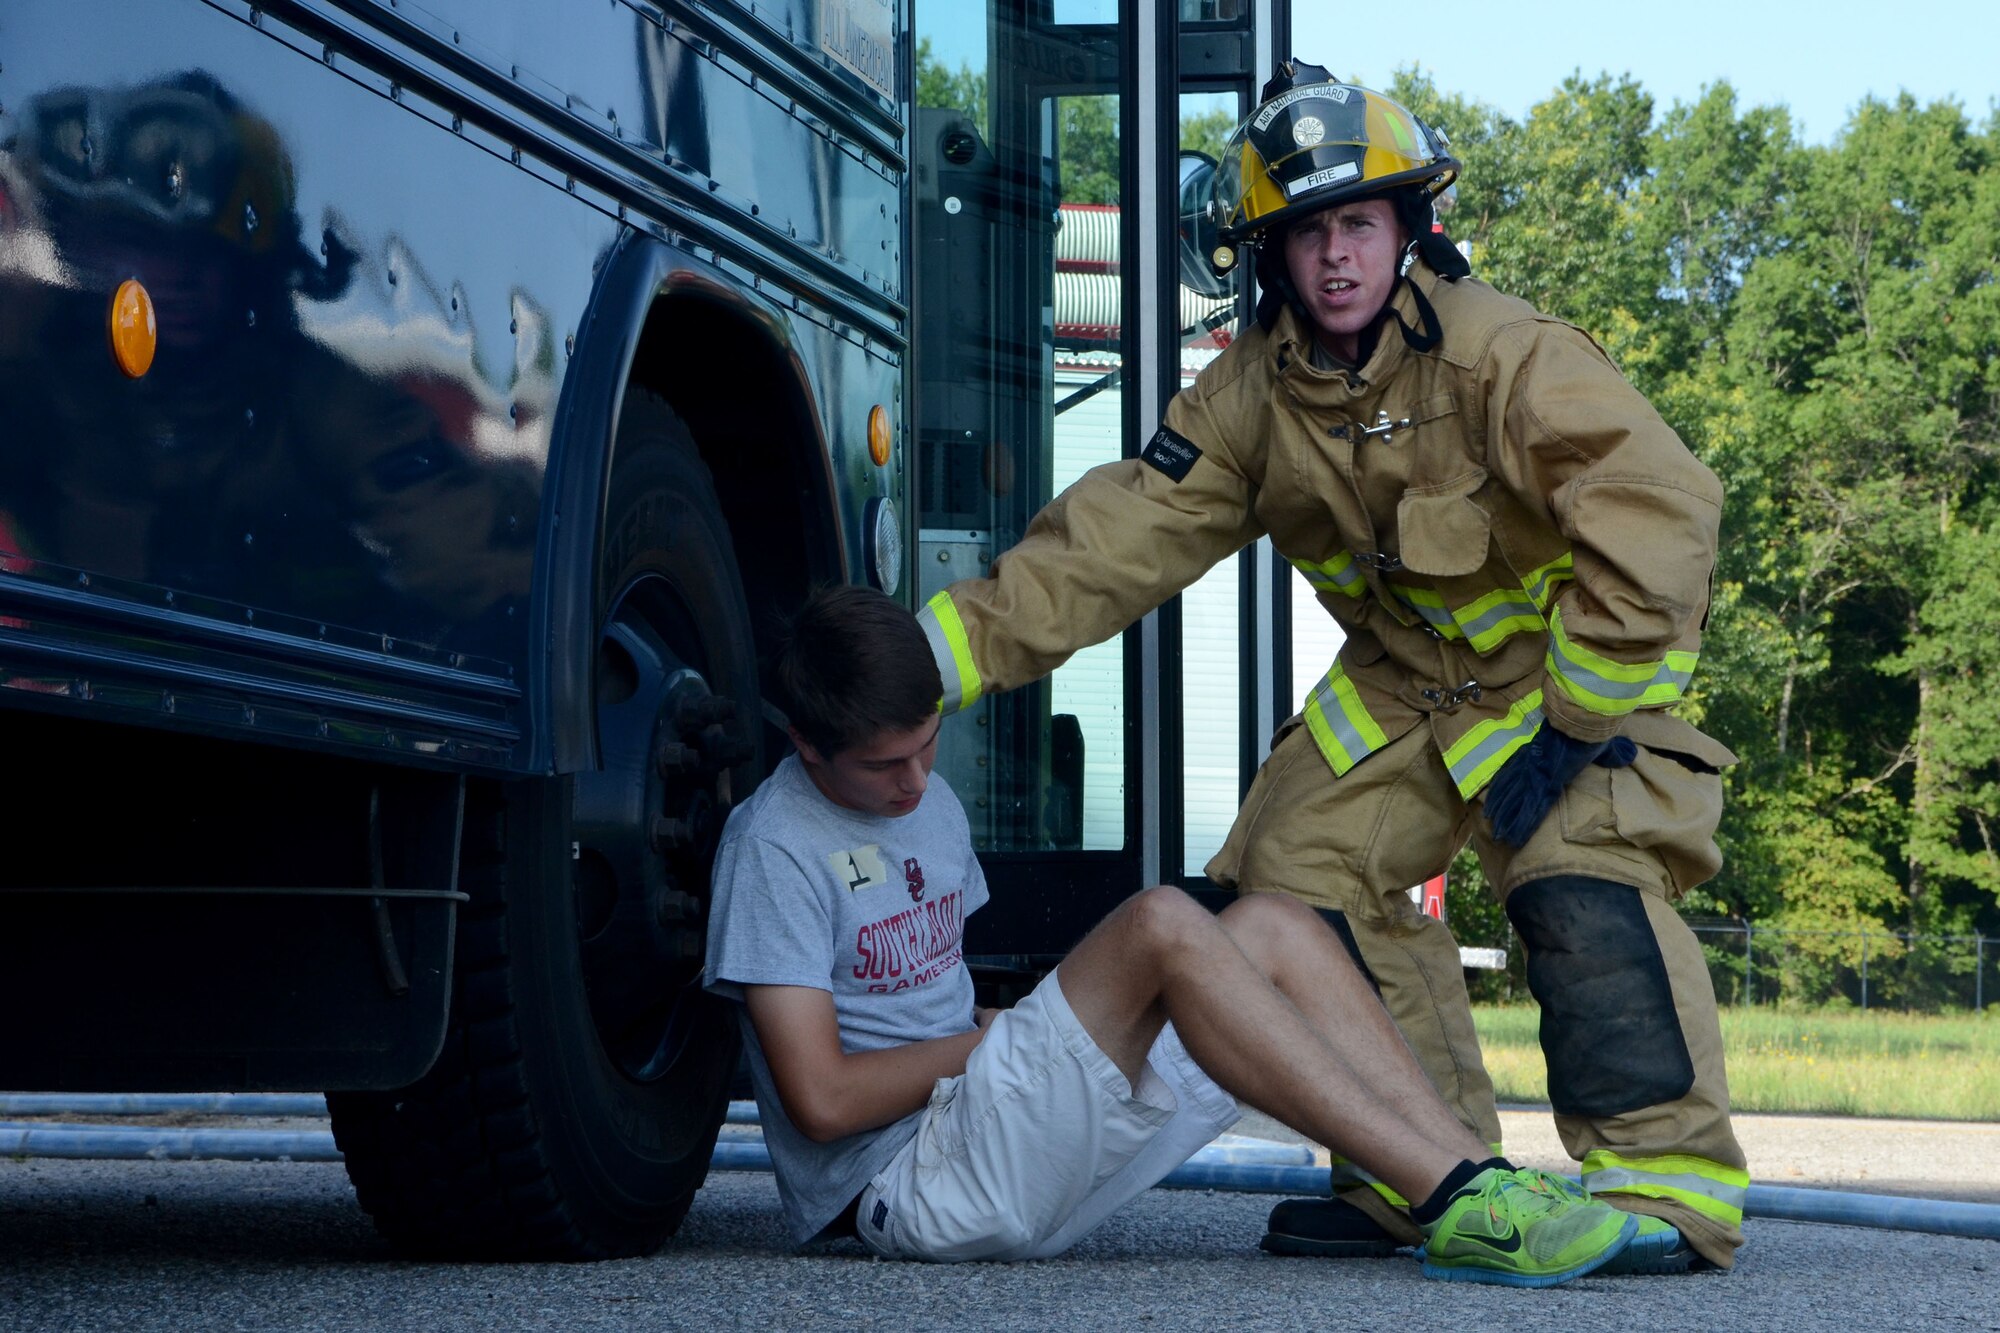 U.S. Air Force Airman 1st Class Kristopher Eiser, a firefighter with the 169th Civil Engineer Squadron, assists Christopher Boatwright, the assistant scout master for Troop 95, who is suffering from a simulated injury during a mass casualty exercise at McEntire Joint National Guard Base, S.C., June 18, 2015. McEntire Joint National Guard Base simulated a vehicle collision on base to offer personnel real-world training should an event ever occur in a real world capacity. (South Carolina Air National Guard photo by Amn Megan Floyd/Released)